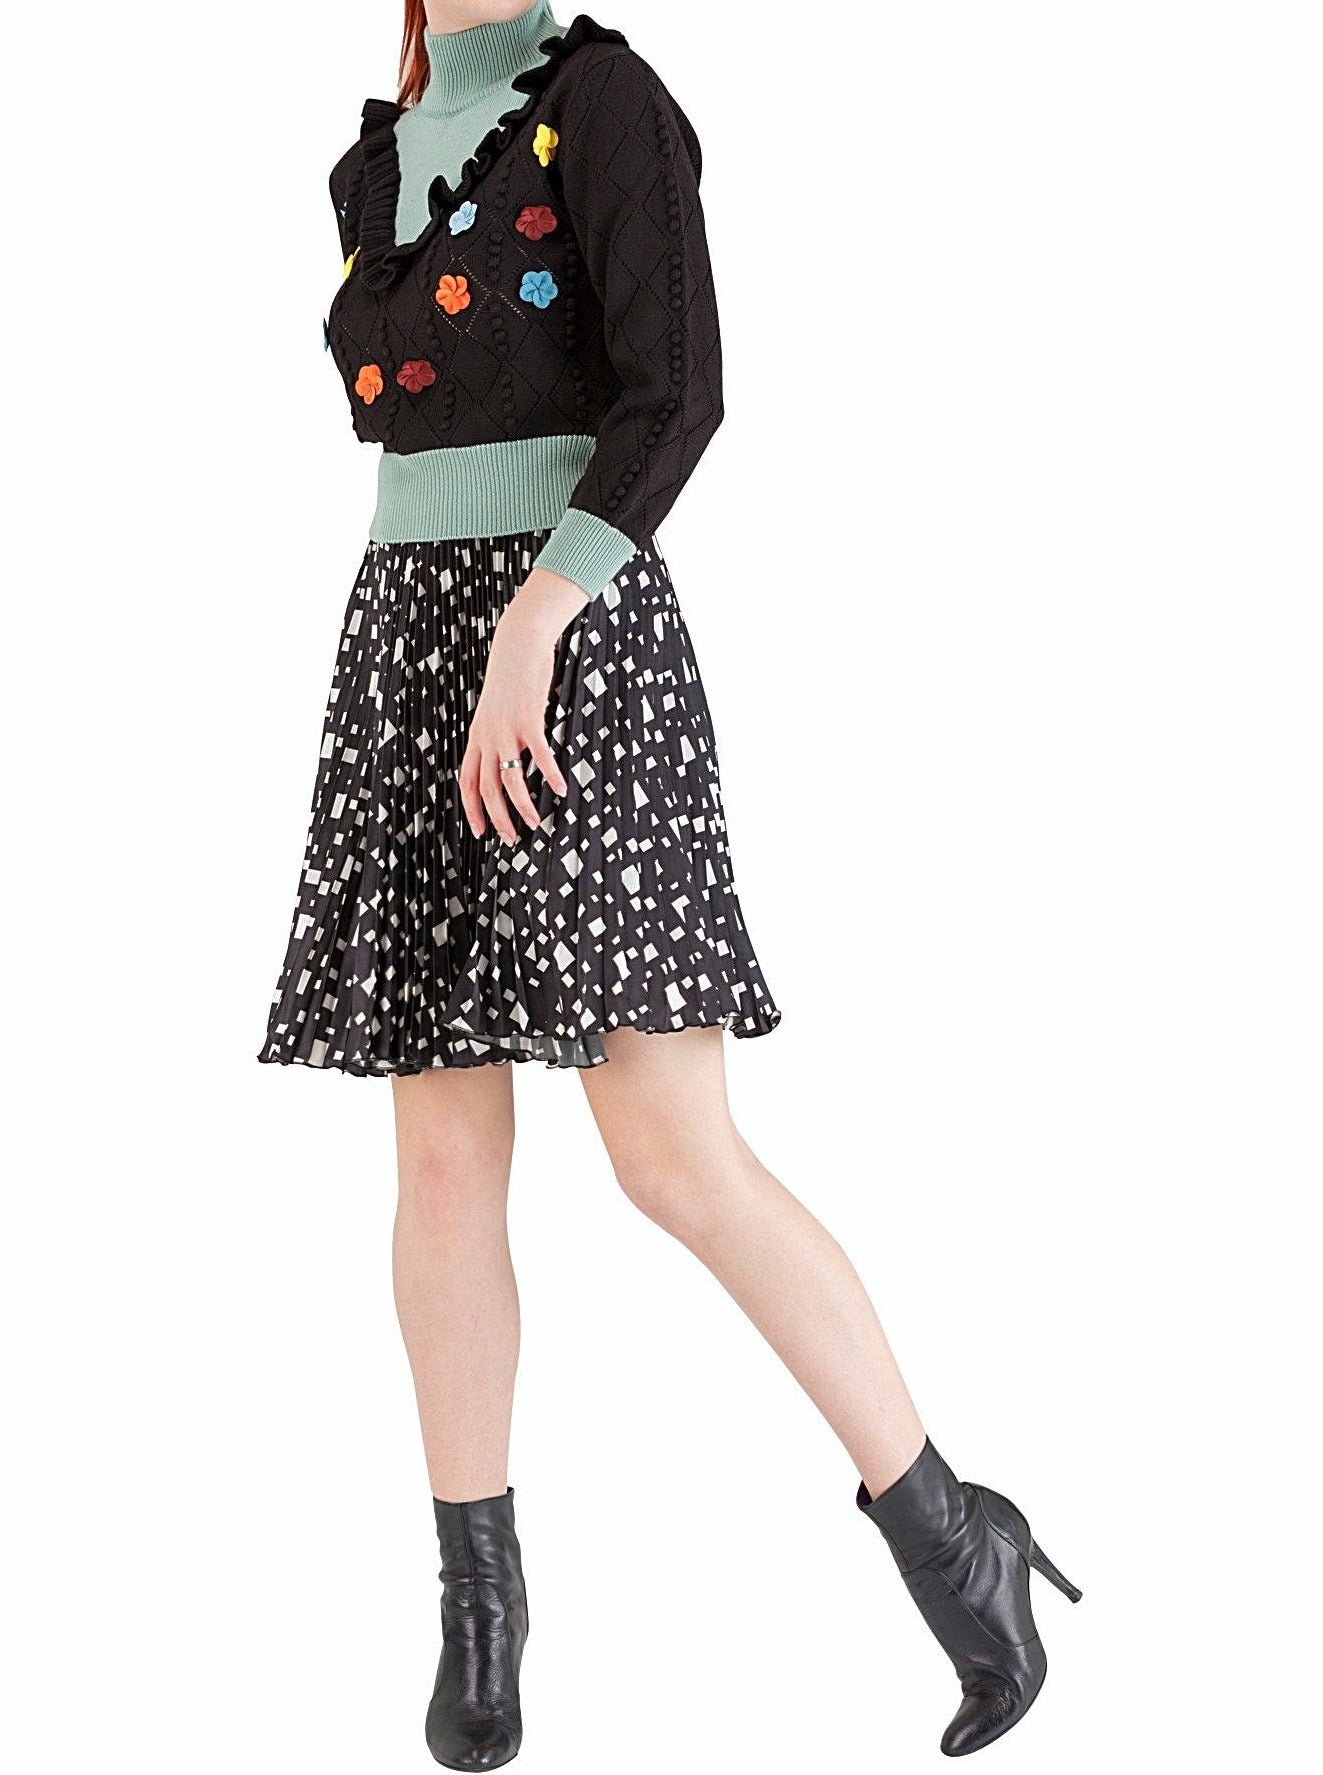 Floral Wool Sweater - 65% off